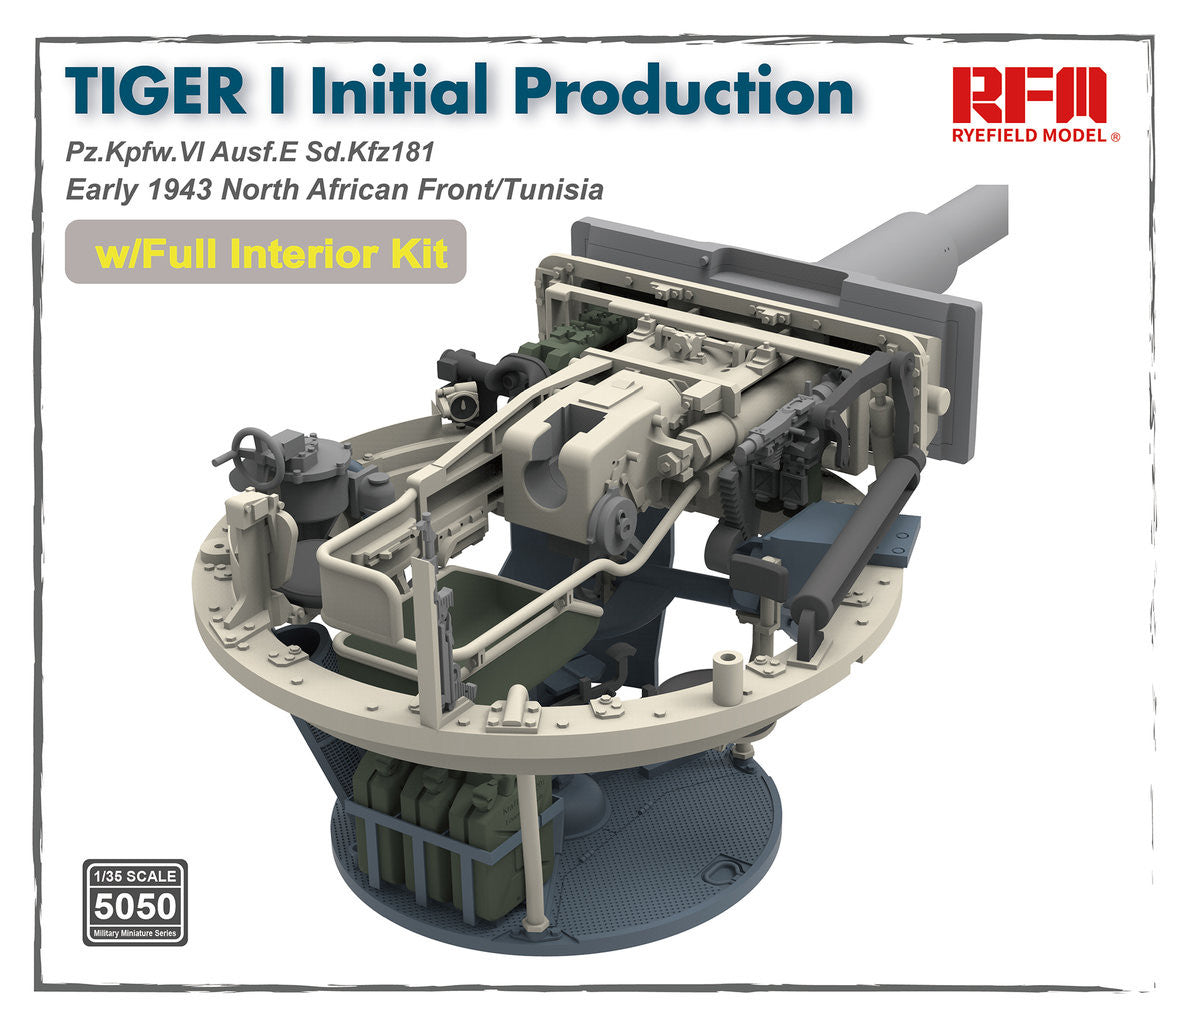 Ryefield Model 1/35 Tiger I Initial Production (with full interior kit) (5050)